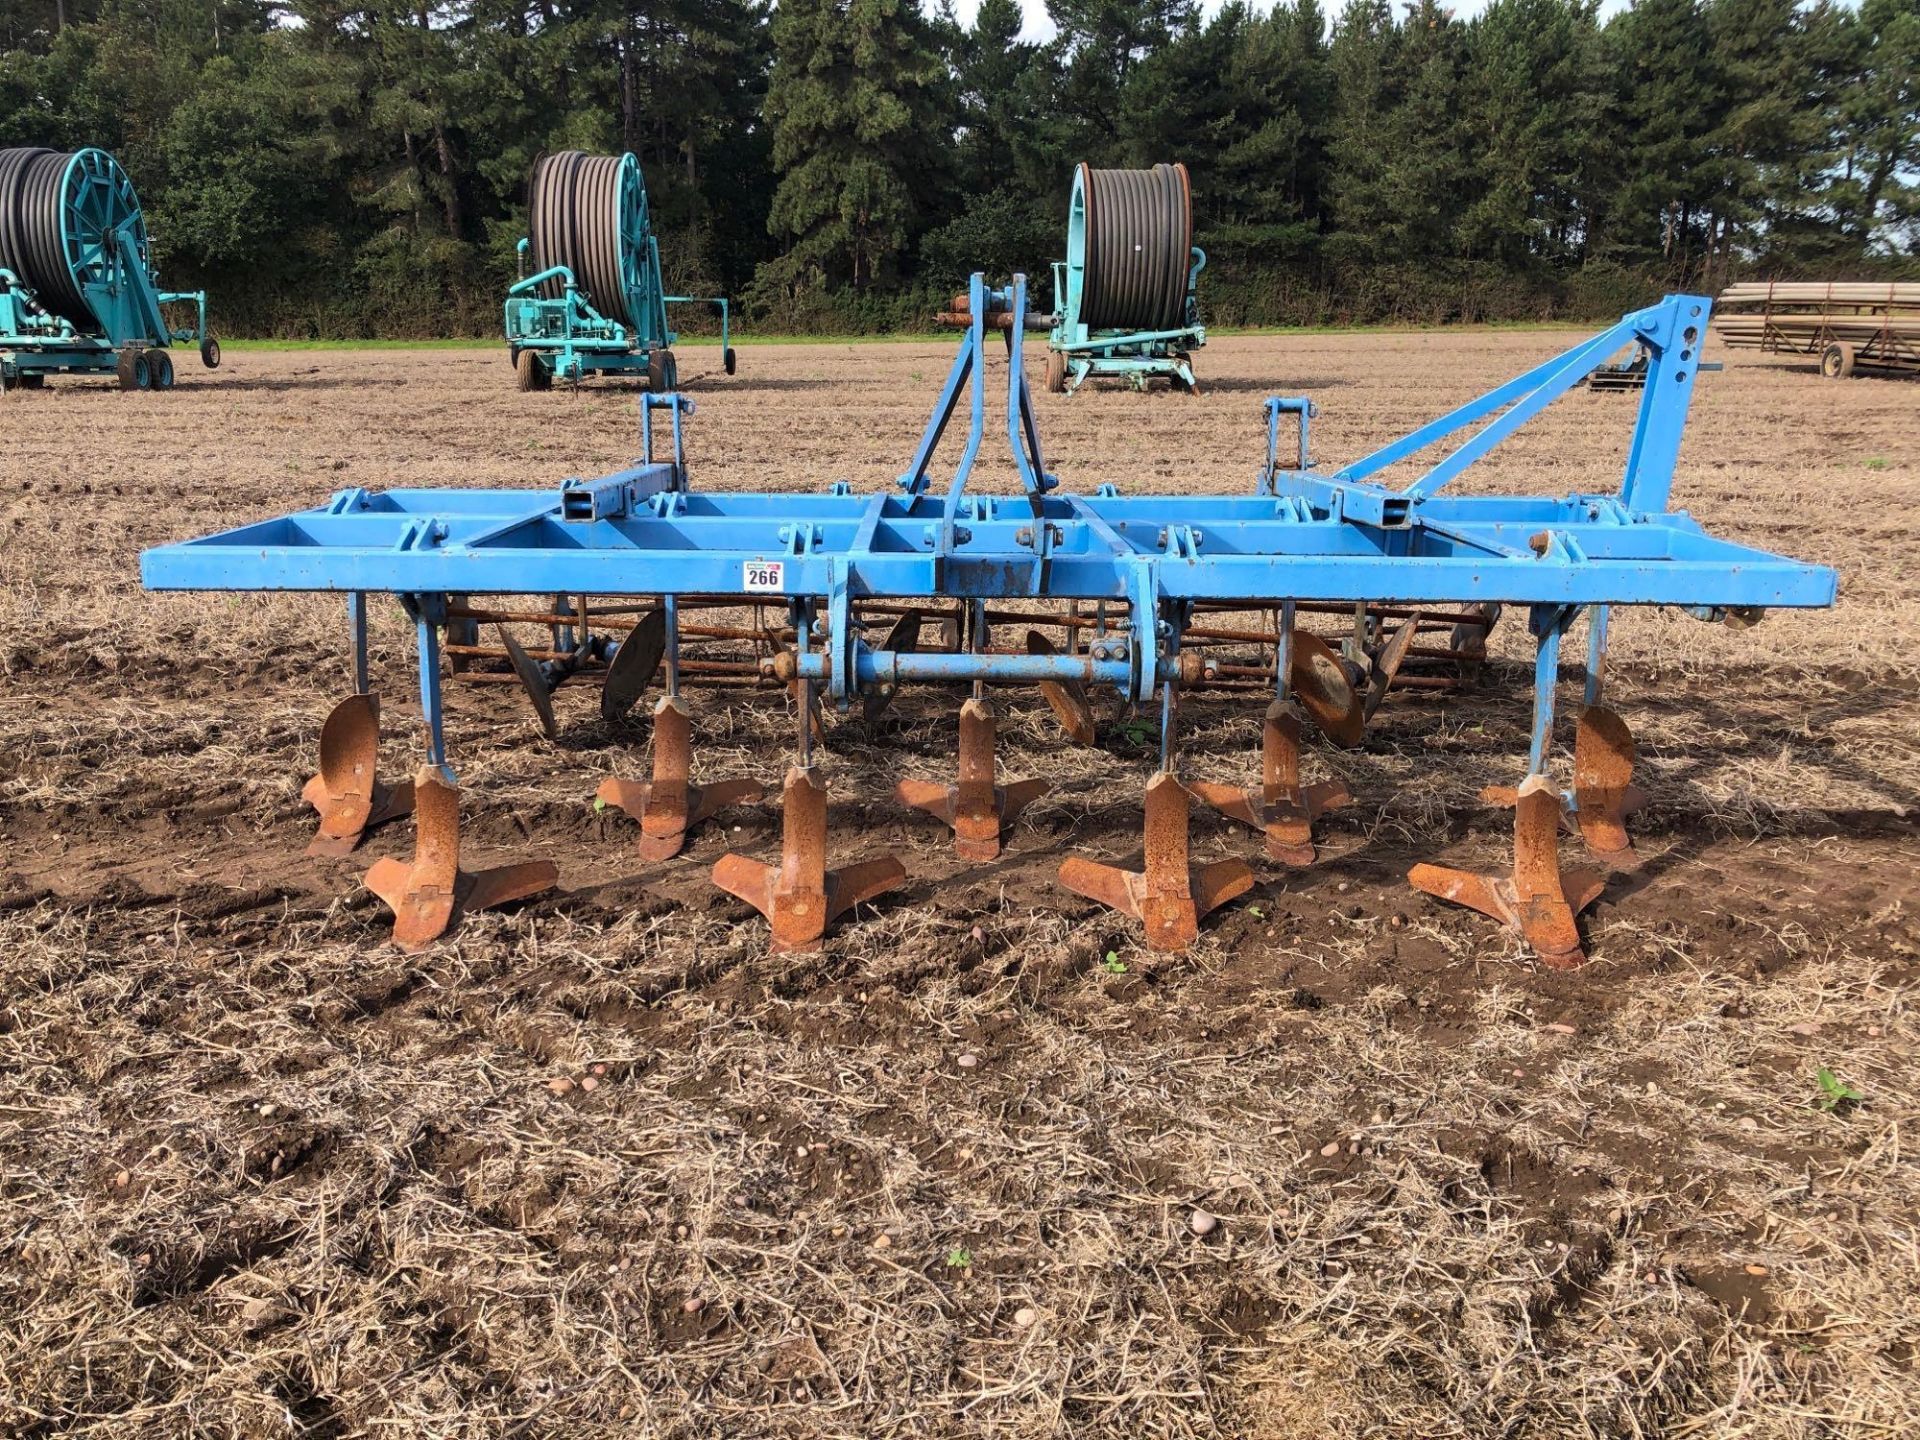 Lemken Smaragd 4m 9 leg fixed tine cultivator with discs, rear crumbler and end tow kit. Serial No: